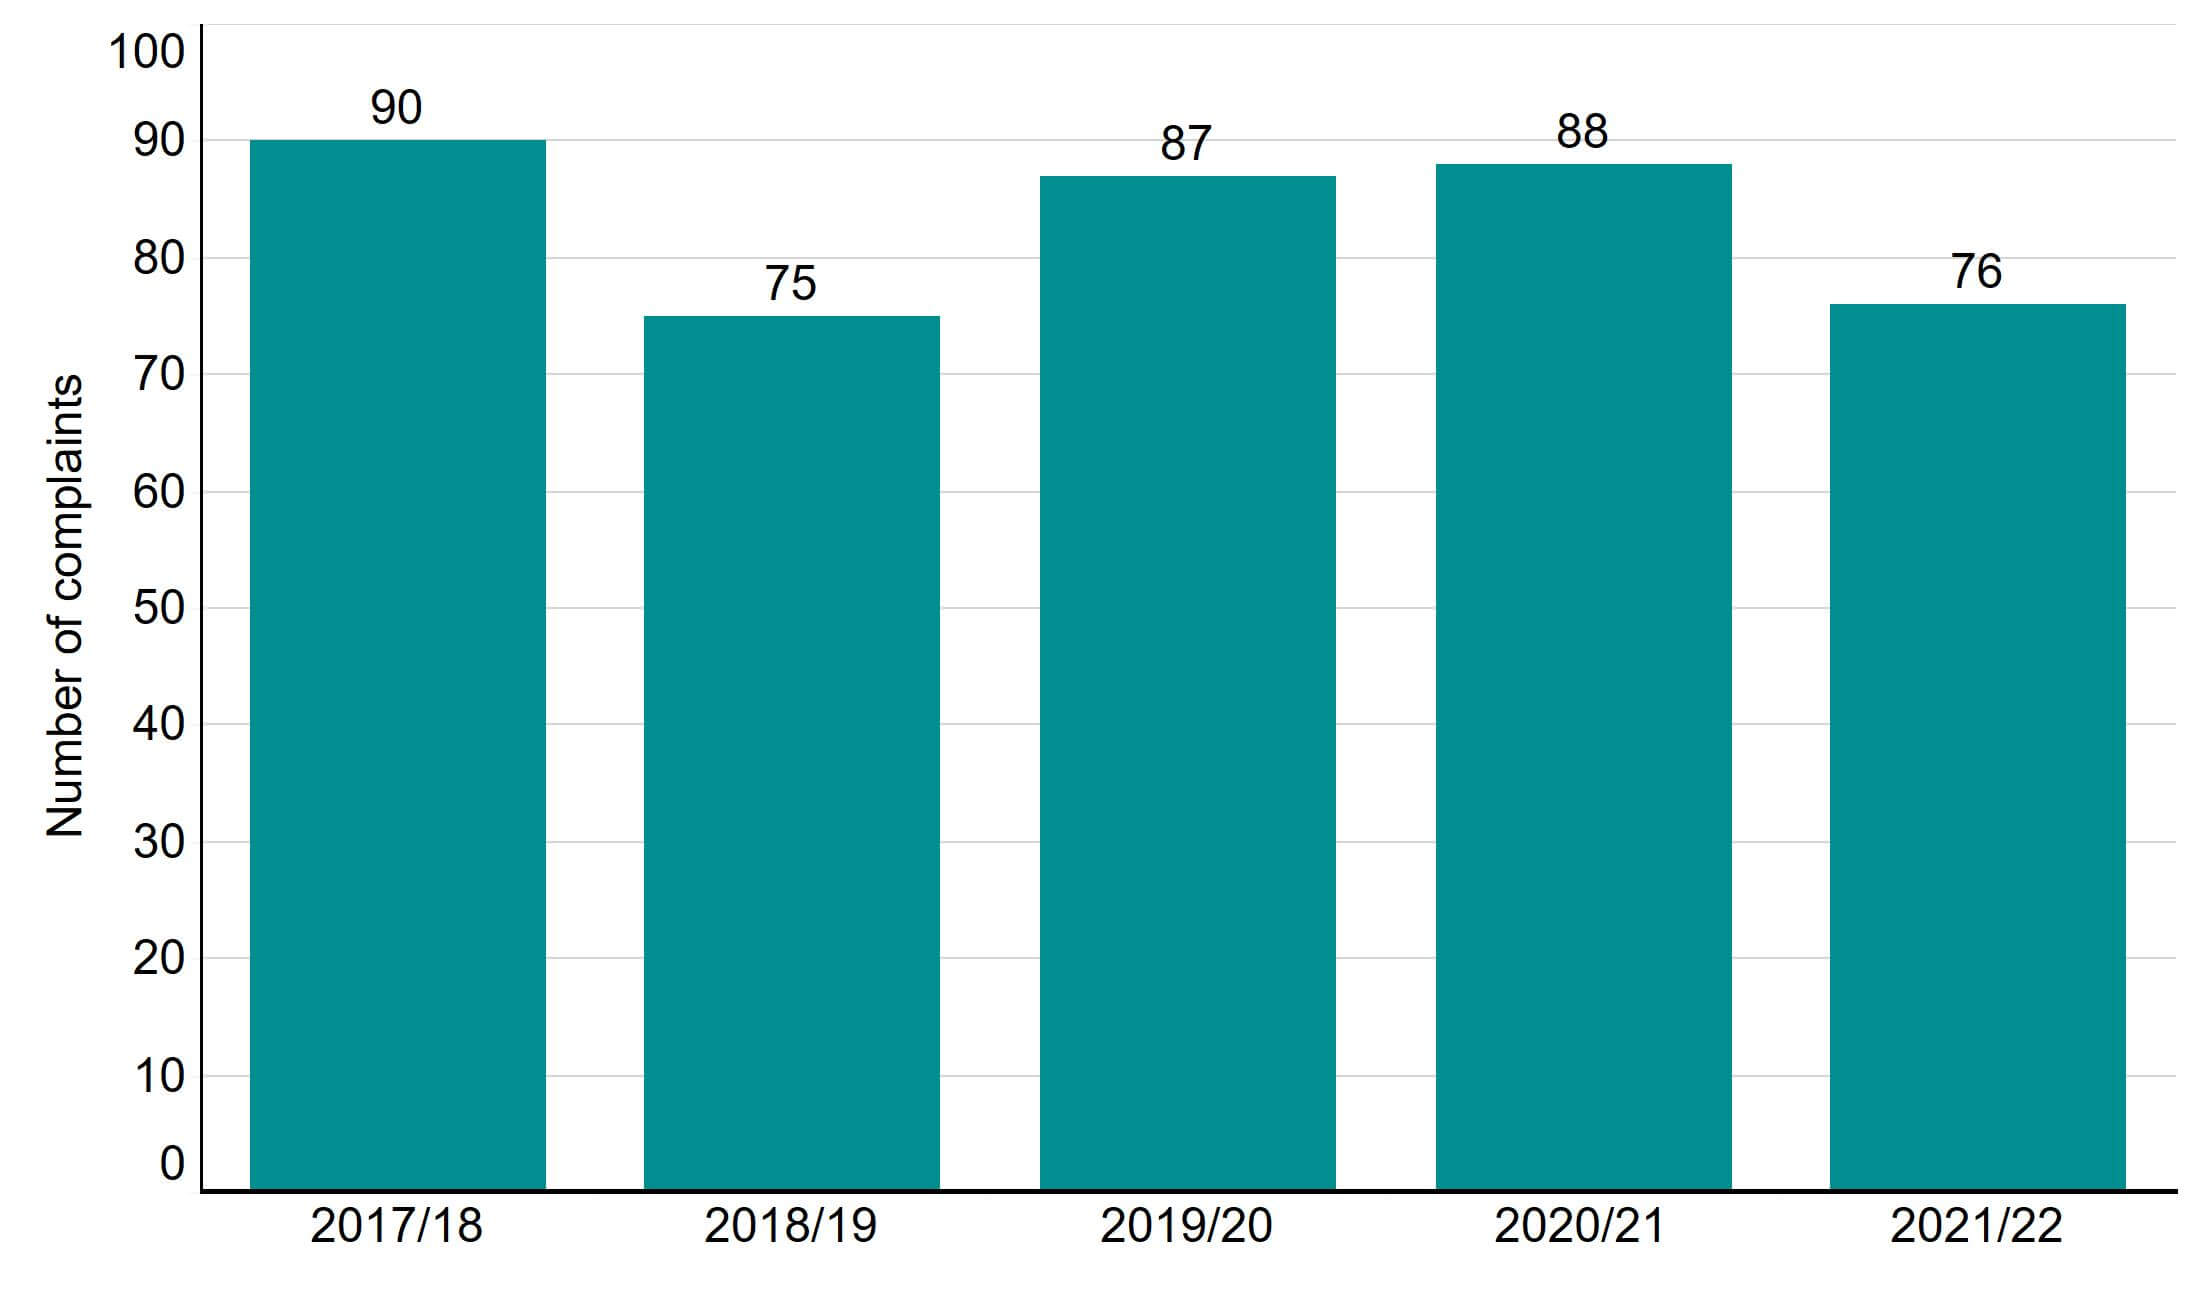 Figure 7: Number of complaints received, 2017/18- 2021/22. Number of complaints received, 2017/18- 2021/22. This bar chart shows the number of complaints received by the HFEA each financial year from 2017/18 to 2021/22. In 2021/22 there were 76 complaints received which has decreased since 2020/21 where there were 88 complaints. An accessible form of the underlying data for this figure can be downloaded at the start of the report in .xls format.